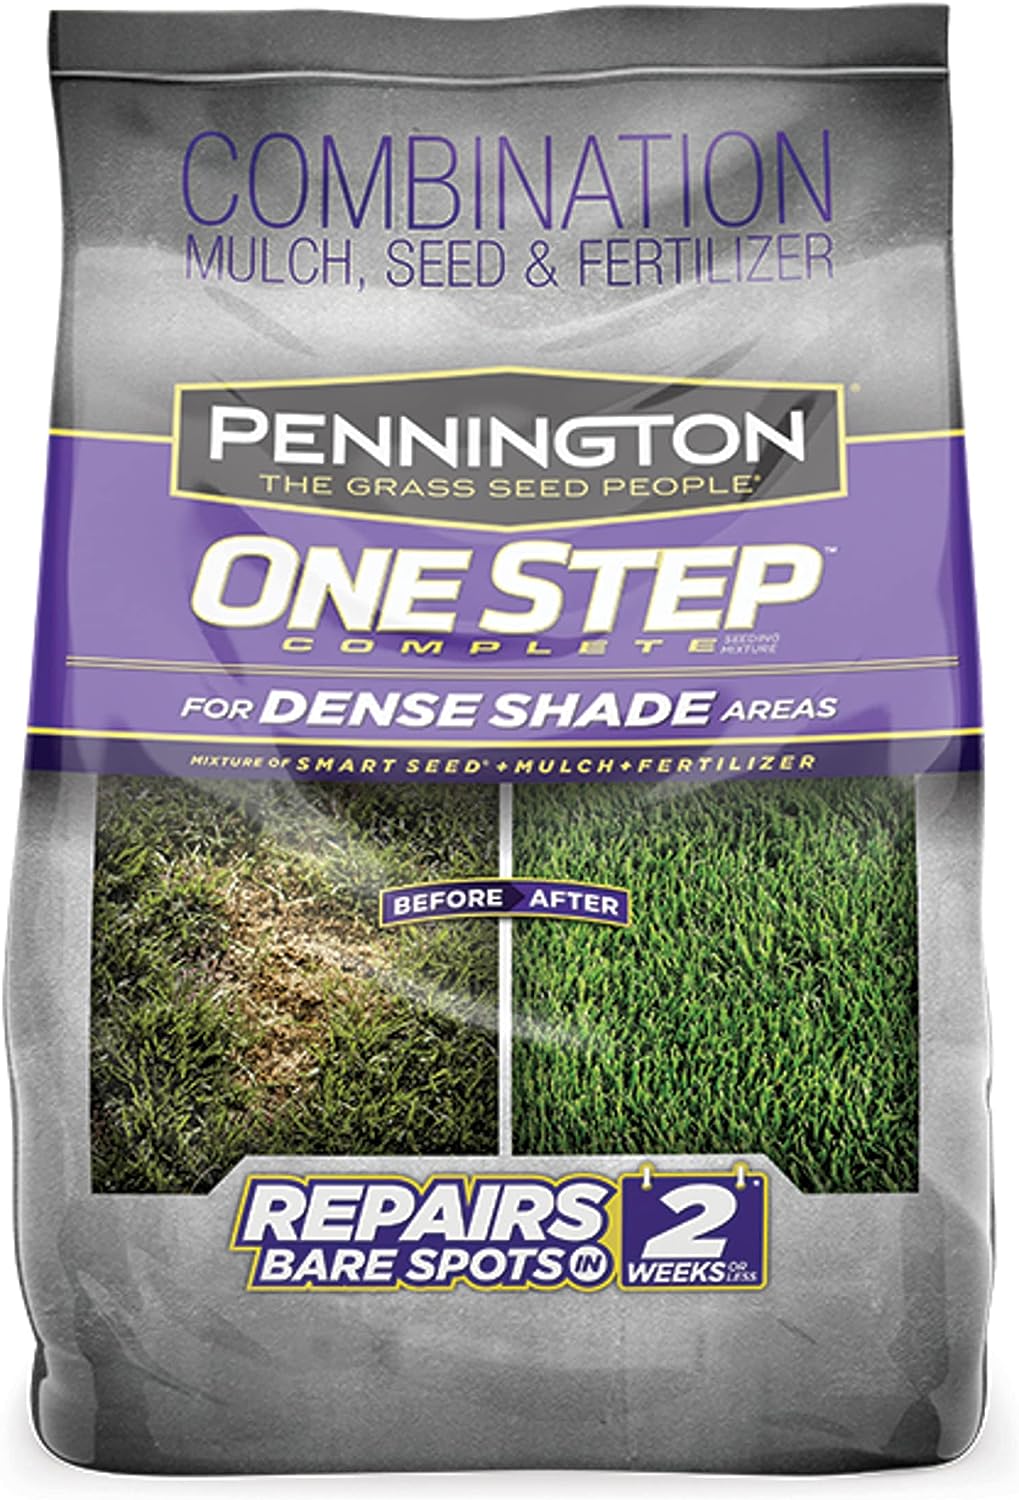 Pennington One Step Complete for Dense Shade Areas - [...]